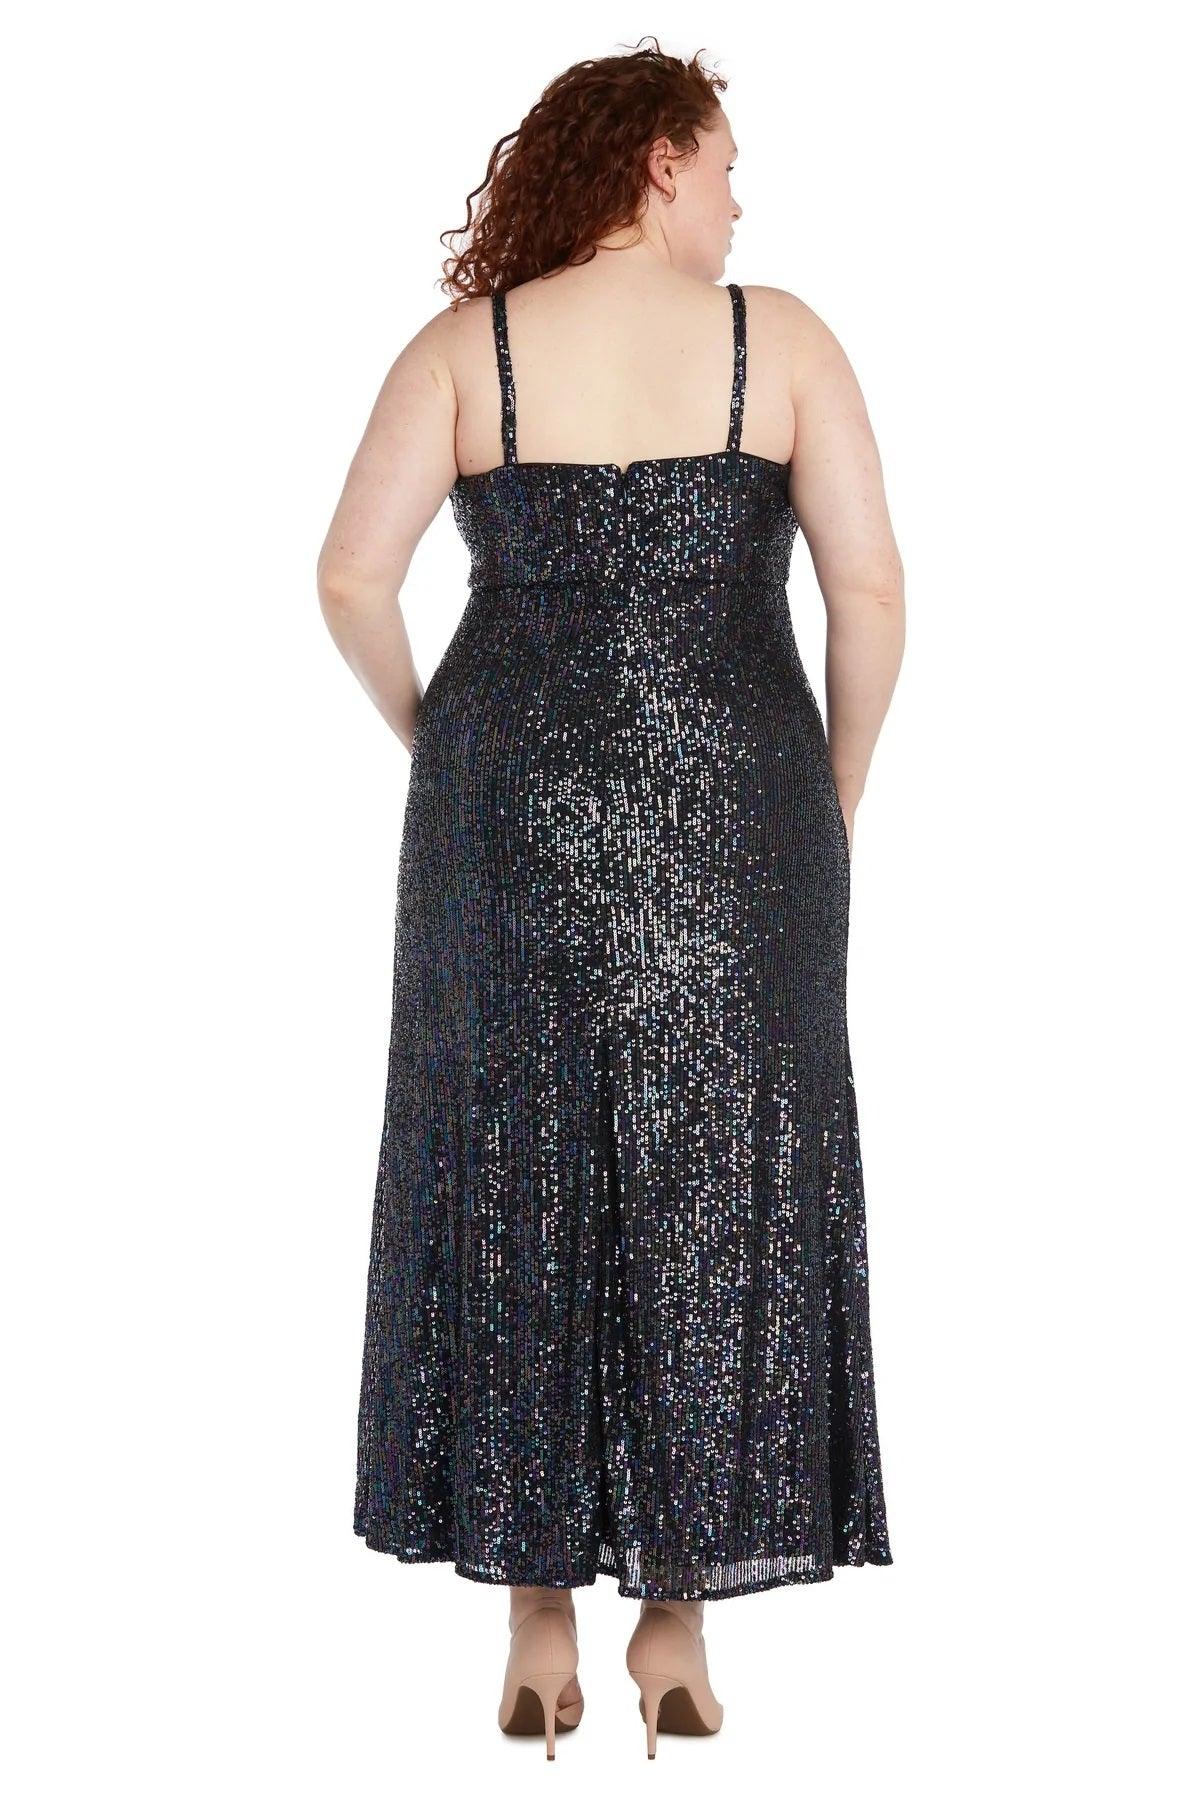 Morgan & Co Long Plus Size Fitted Prom Gown 12935W - The Dress Outlet